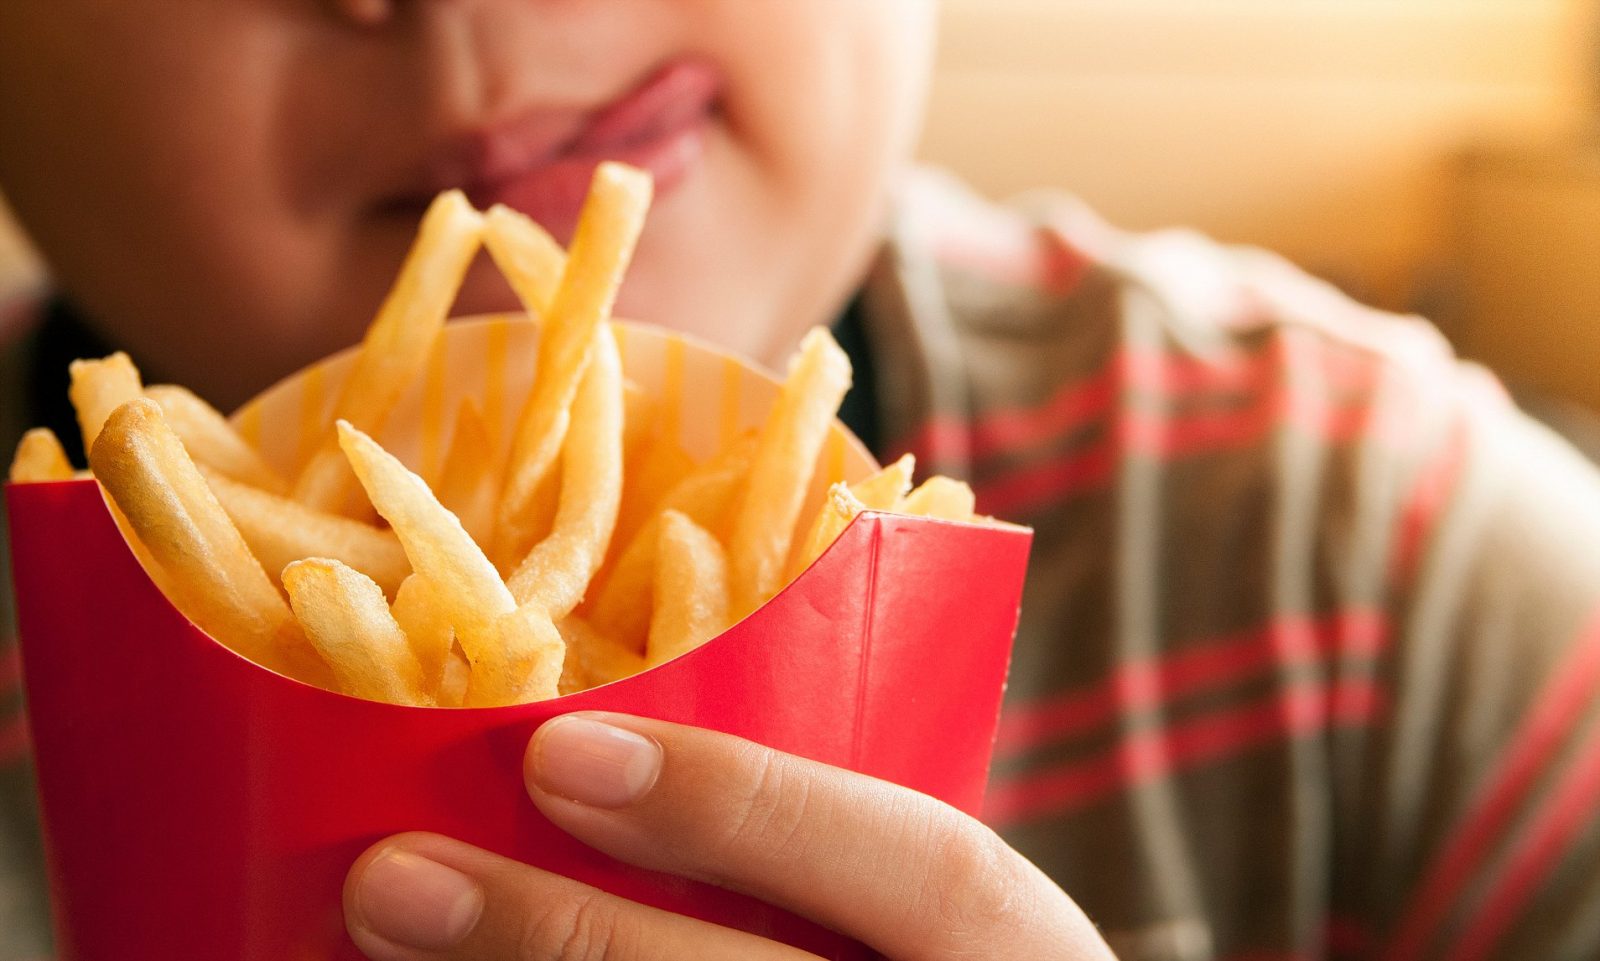 🍴 If You Eat 8/25 of These Foods With a Fork, You’re Forking Ridiculous Cropped Image Of Tempted Boy Holding French Fries Packet